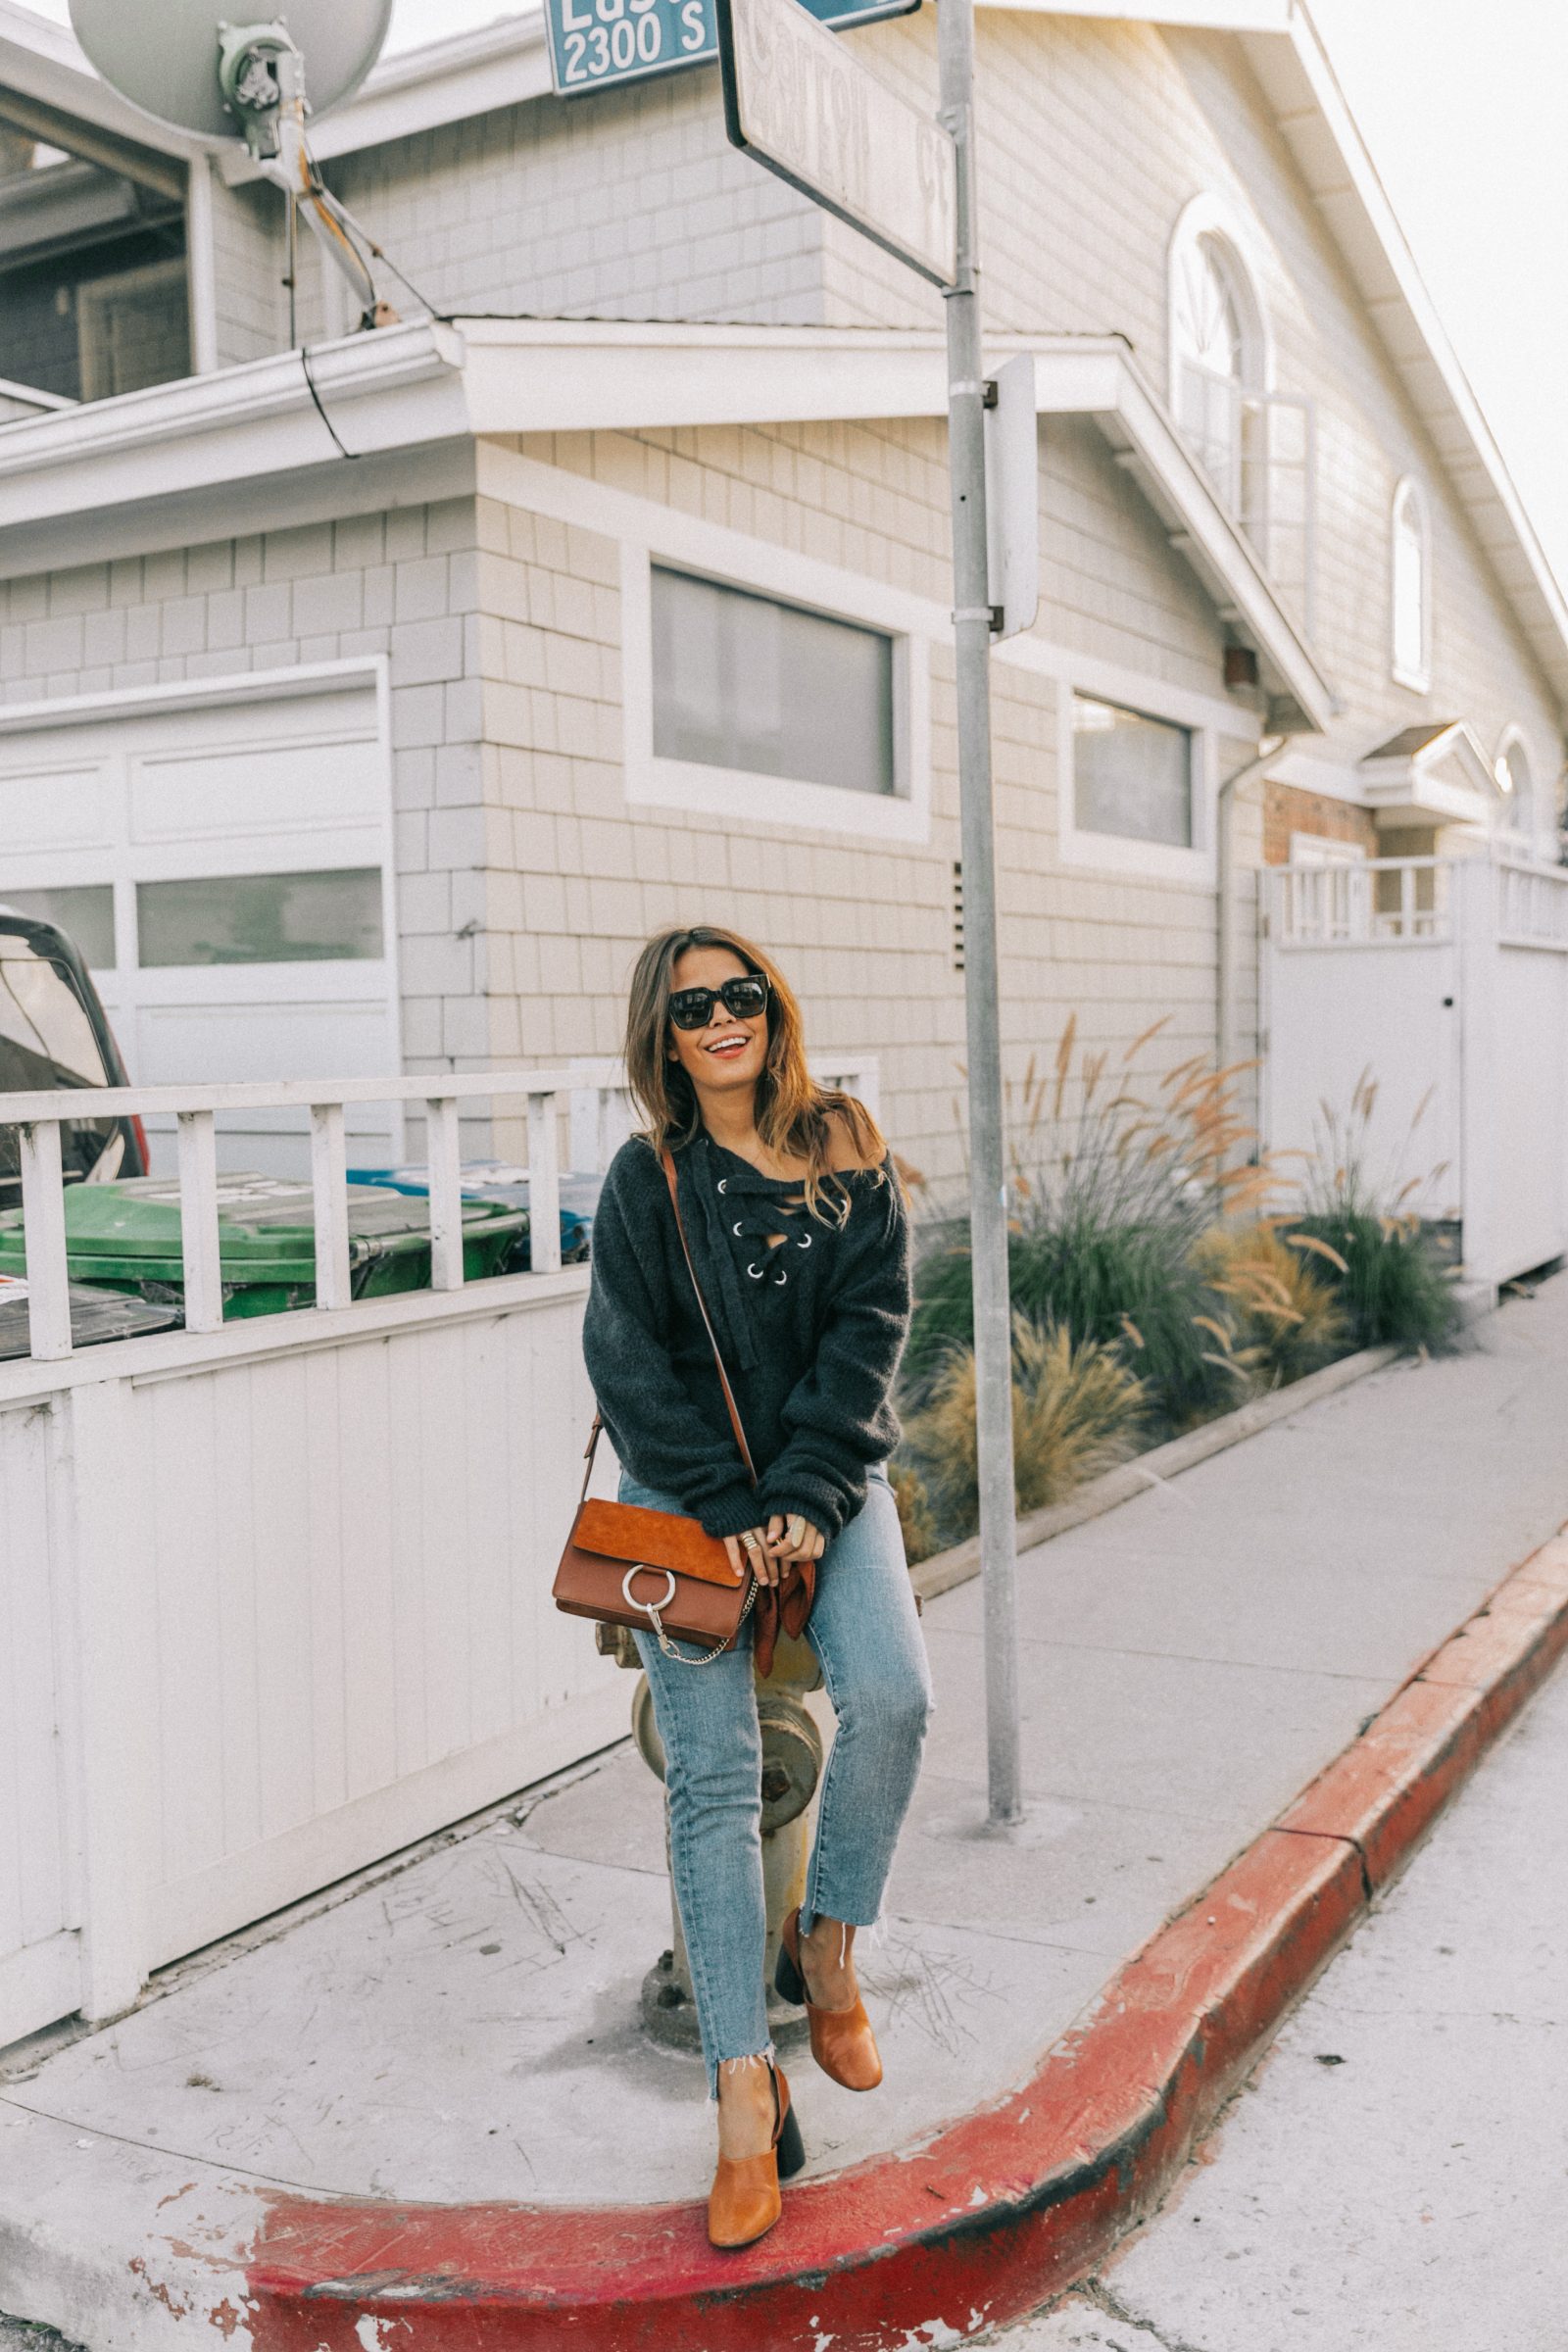 venice_beach-knotted_jumper-levis_jeans-chloe_bag-mango_shoes-horn_necklaces-outfit-street_style-los_angeles-collage_vintage-147